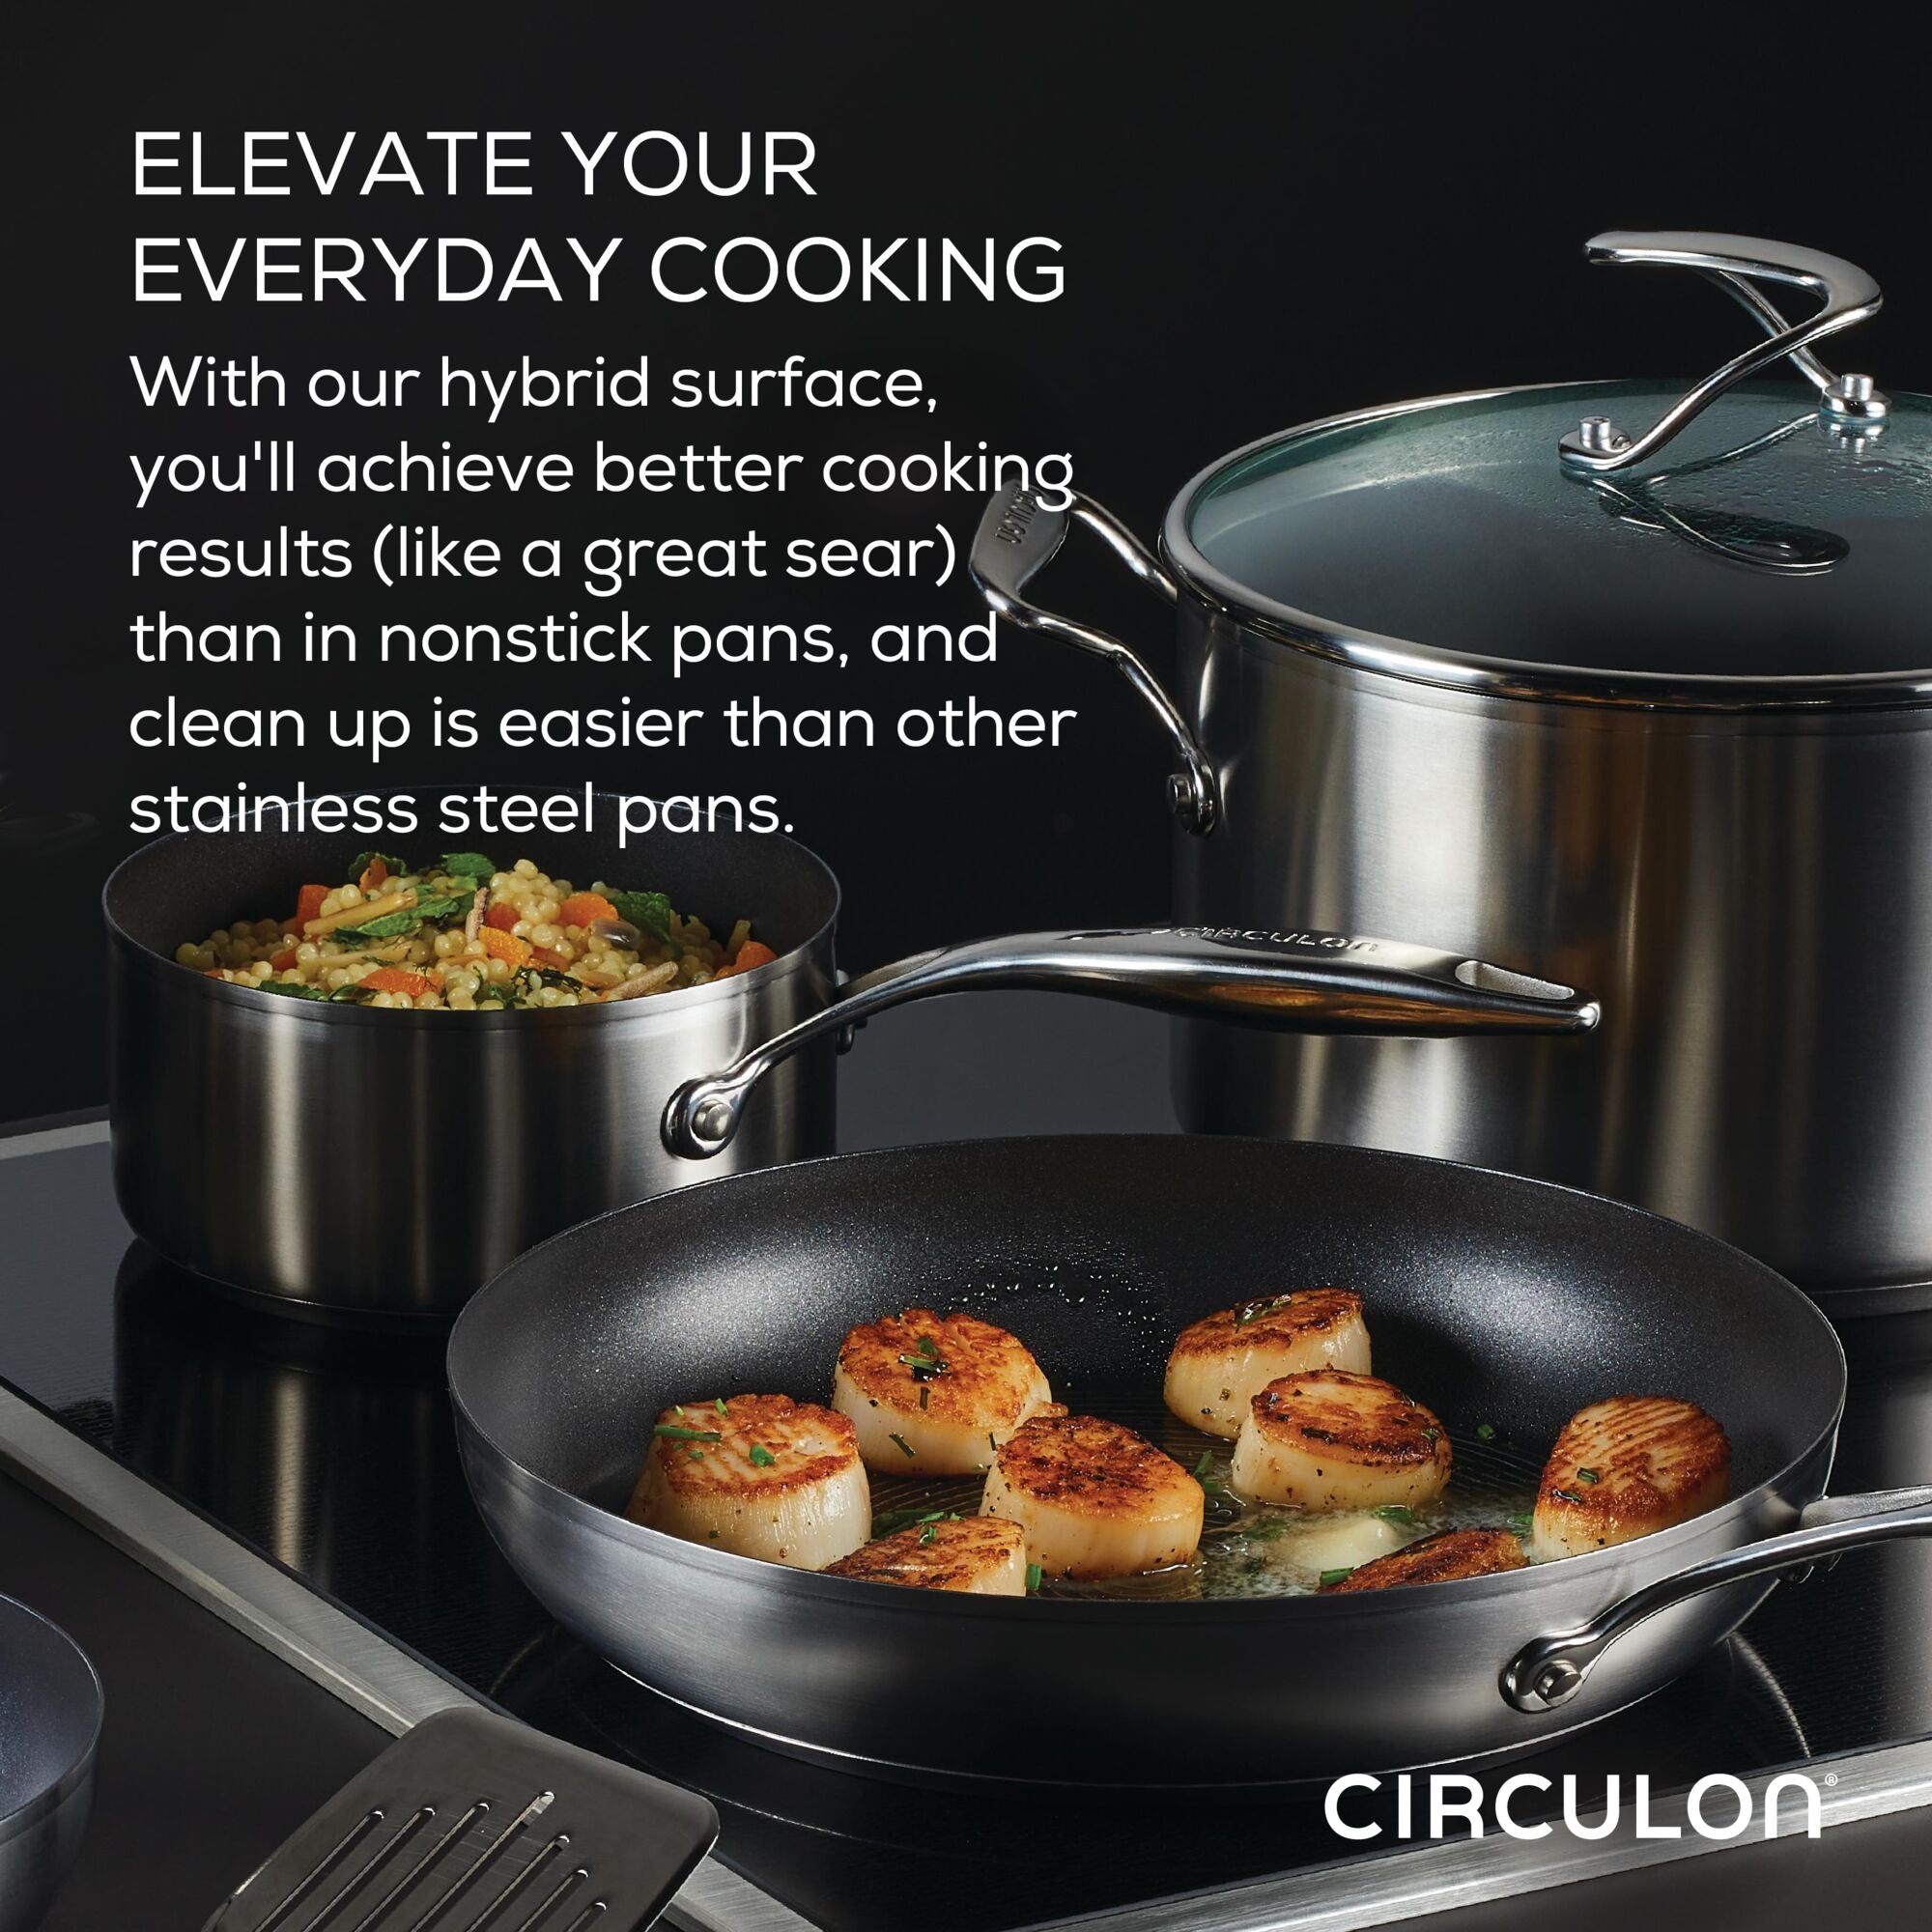 Le Creuset Nonstick Stainless Steel Fry Pan 8-in